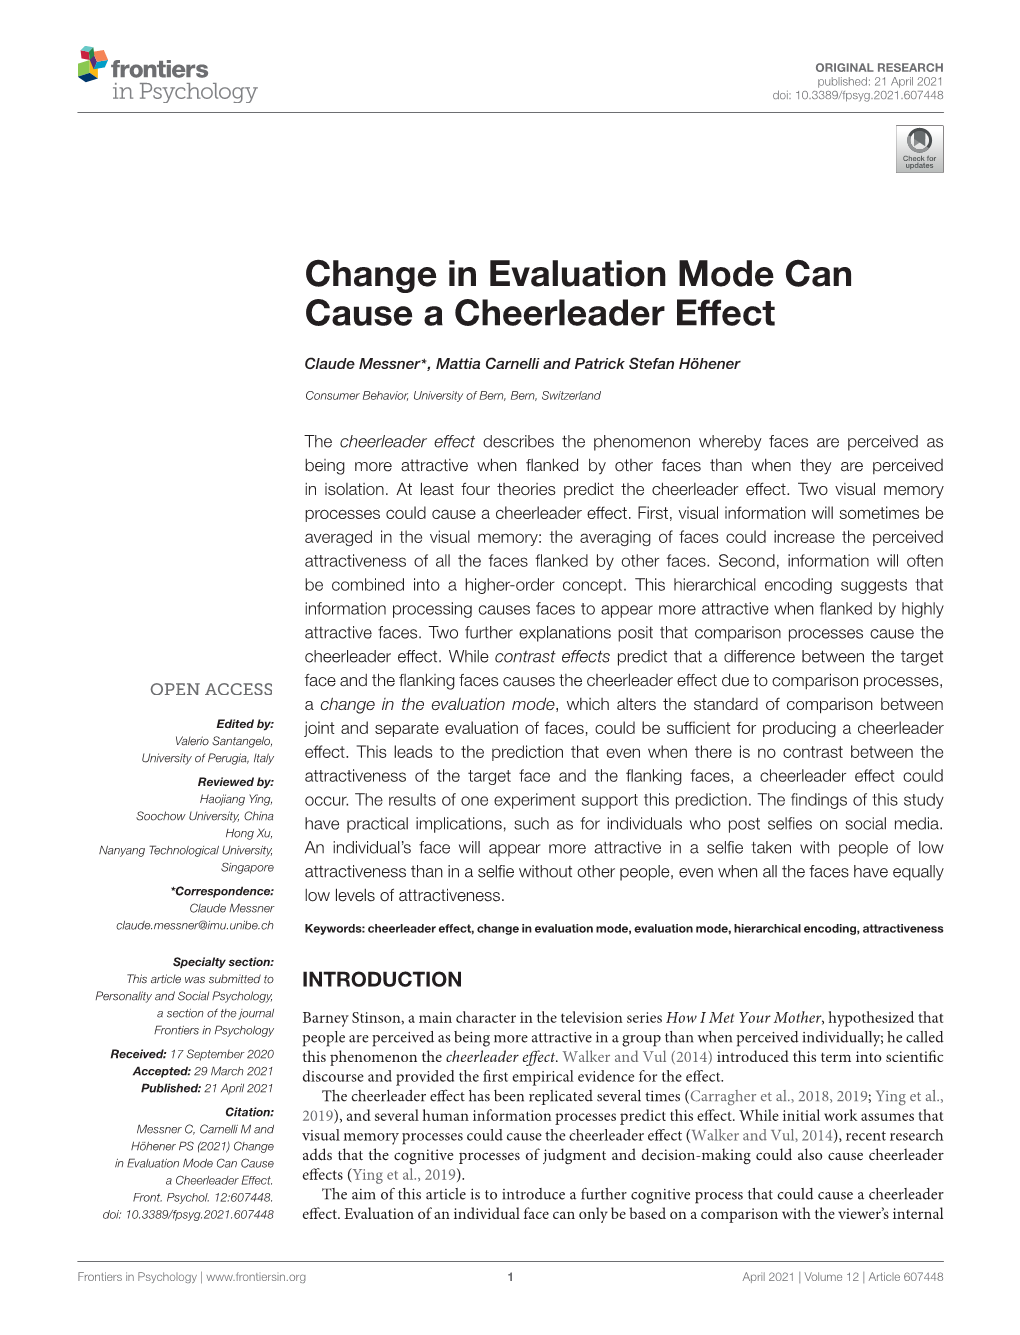 Change in Evaluation Mode Can Cause a Cheerleader Effect